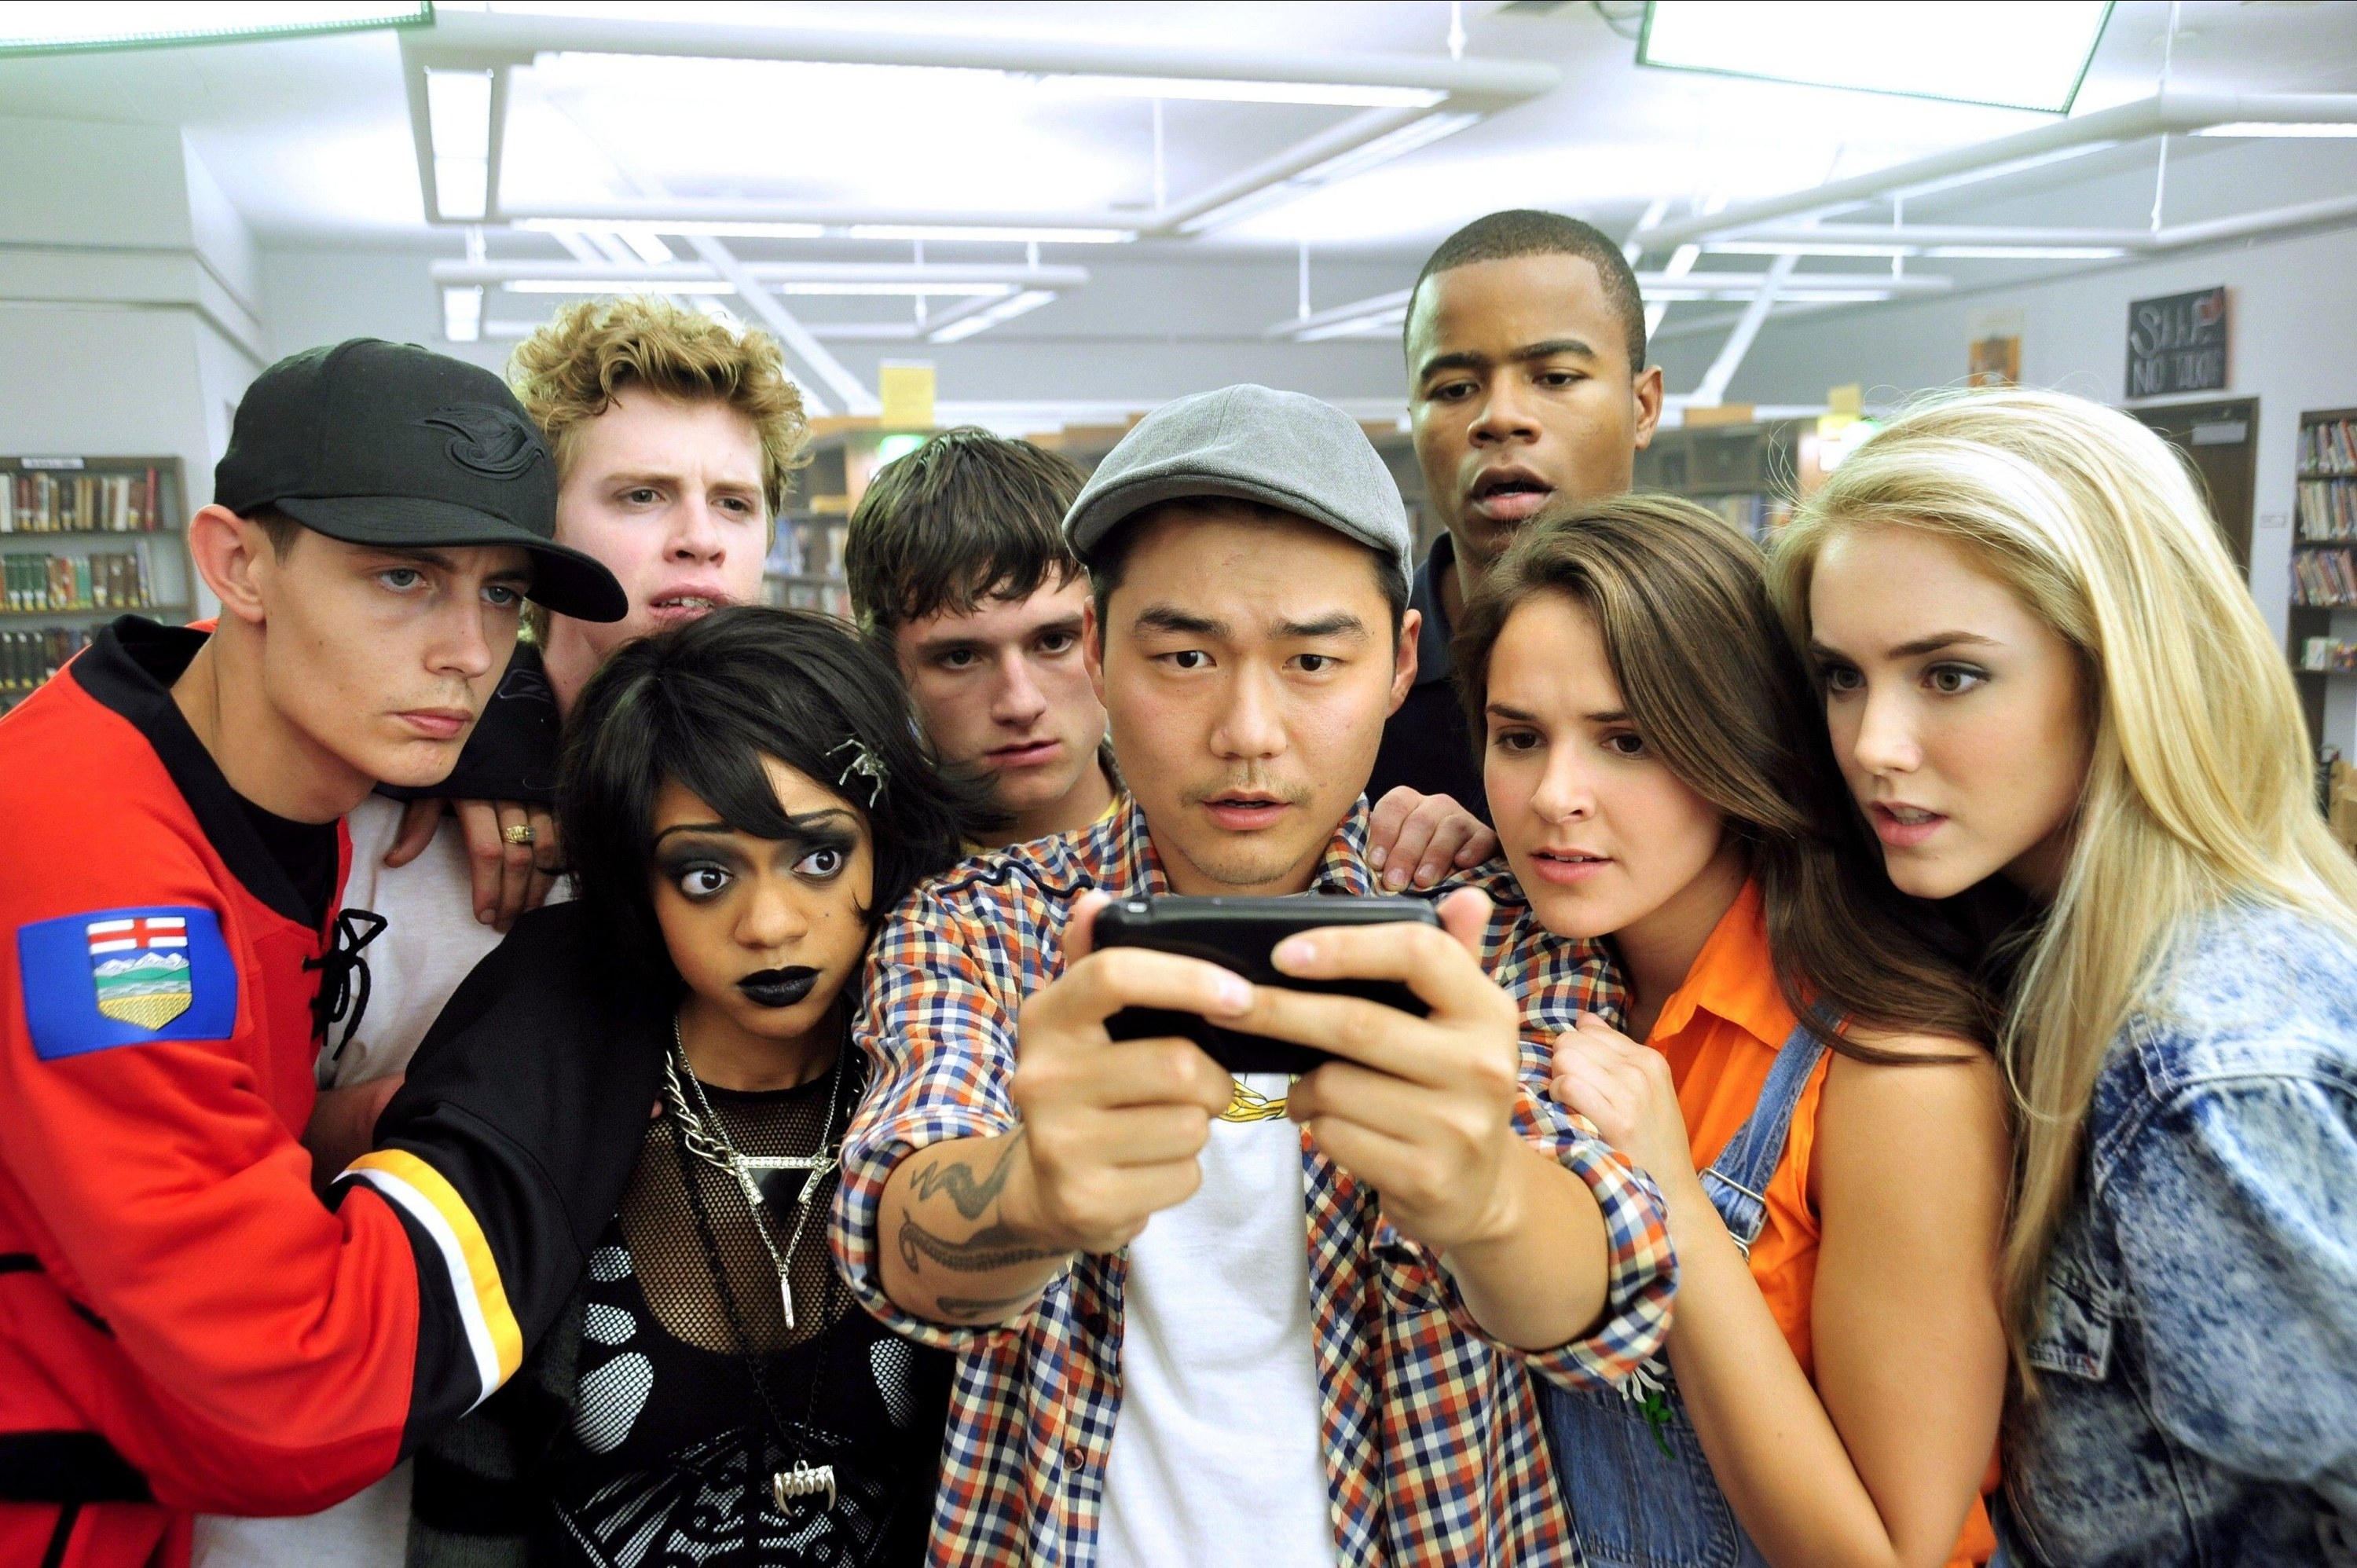 A group of teenagers gather to look at a shocking video on a phone